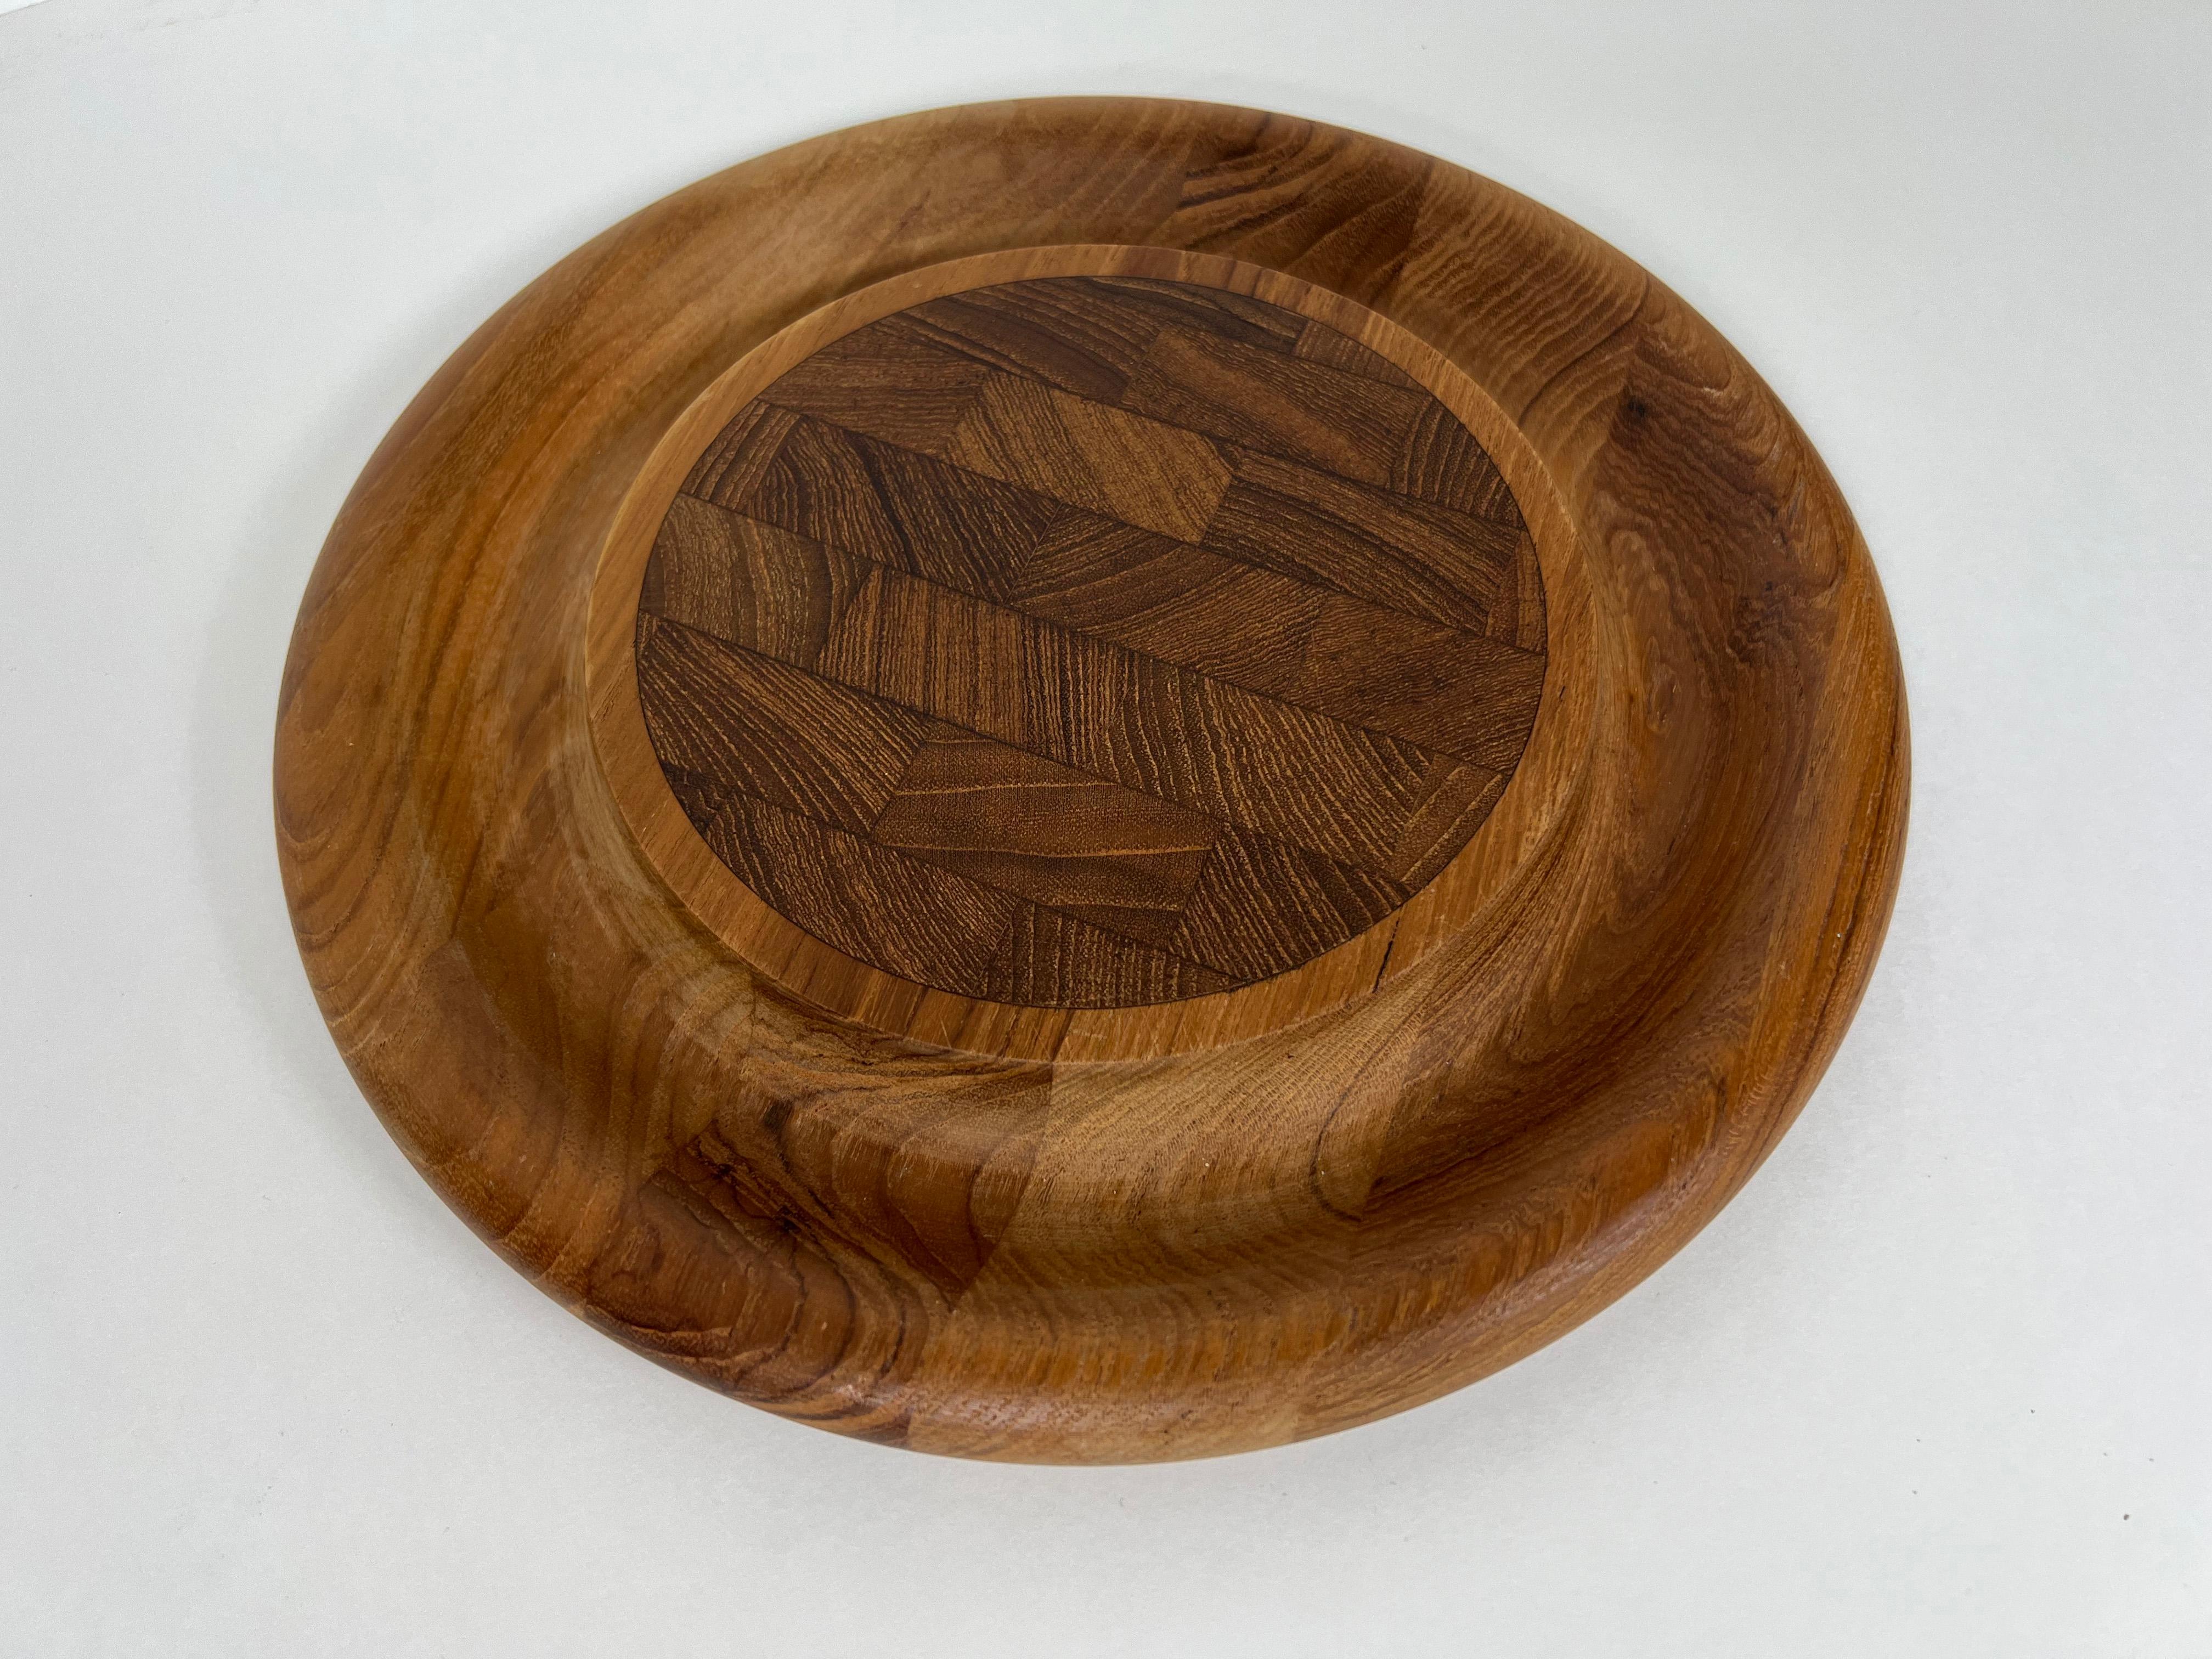 Vintage round cutting board in end-grain teak by Jens Quistgaard for Dansk. Great for use a charcuterie or serving board. Marked 